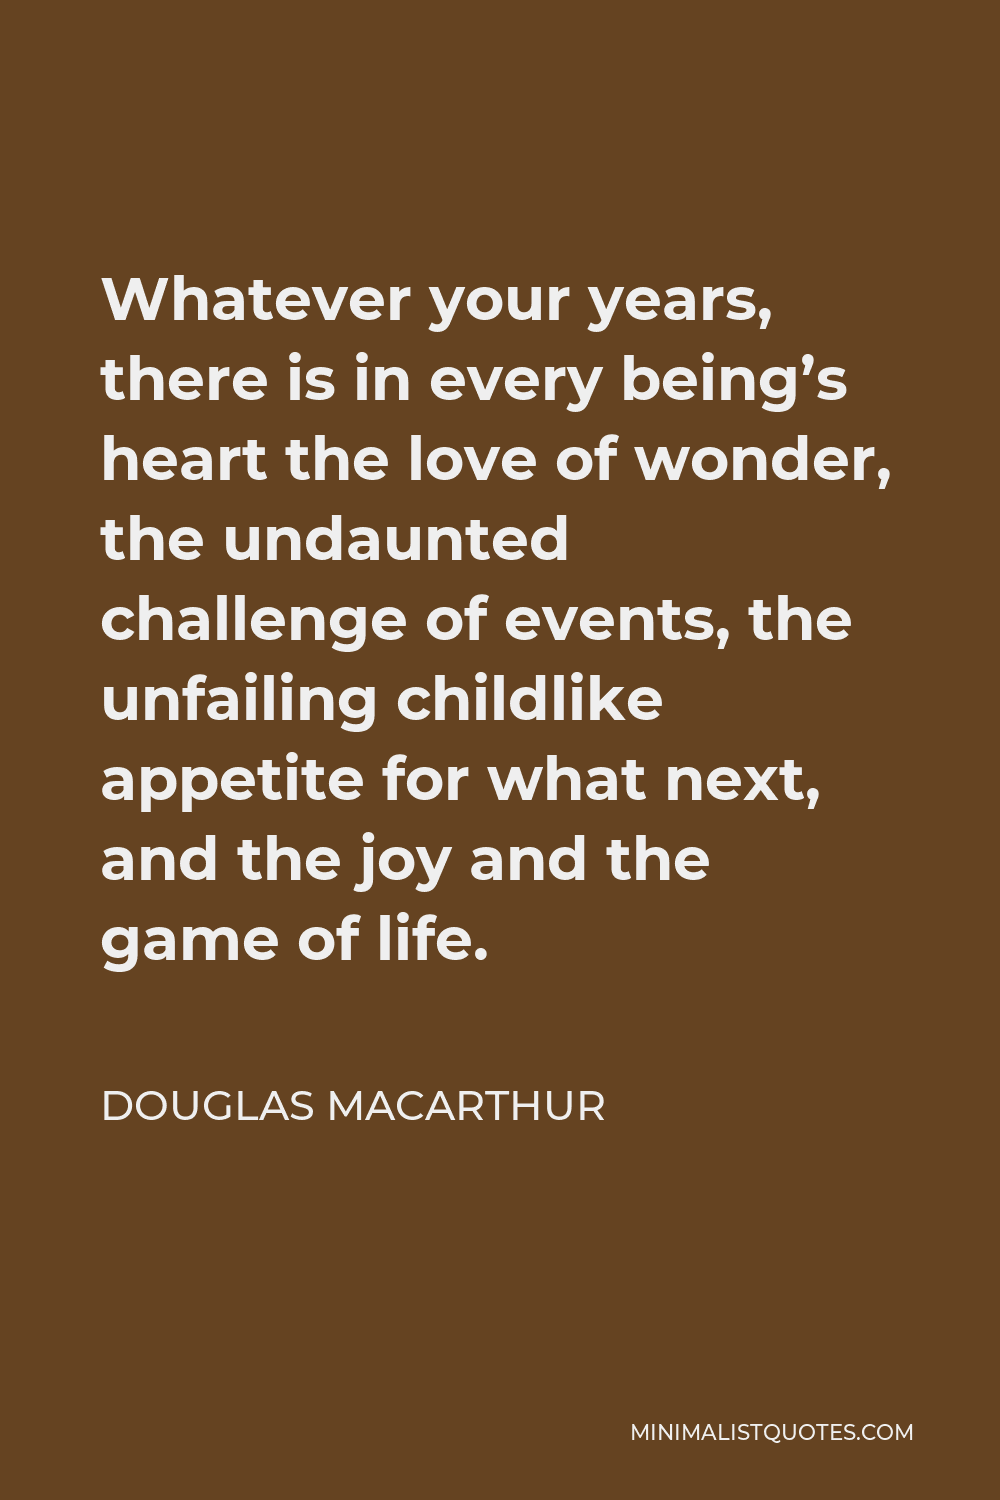 Douglas MacArthur Quote - Whatever your years, there is in every being’s heart the love of wonder, the undaunted challenge of events, the unfailing childlike appetite for what next, and the joy and the game of life.